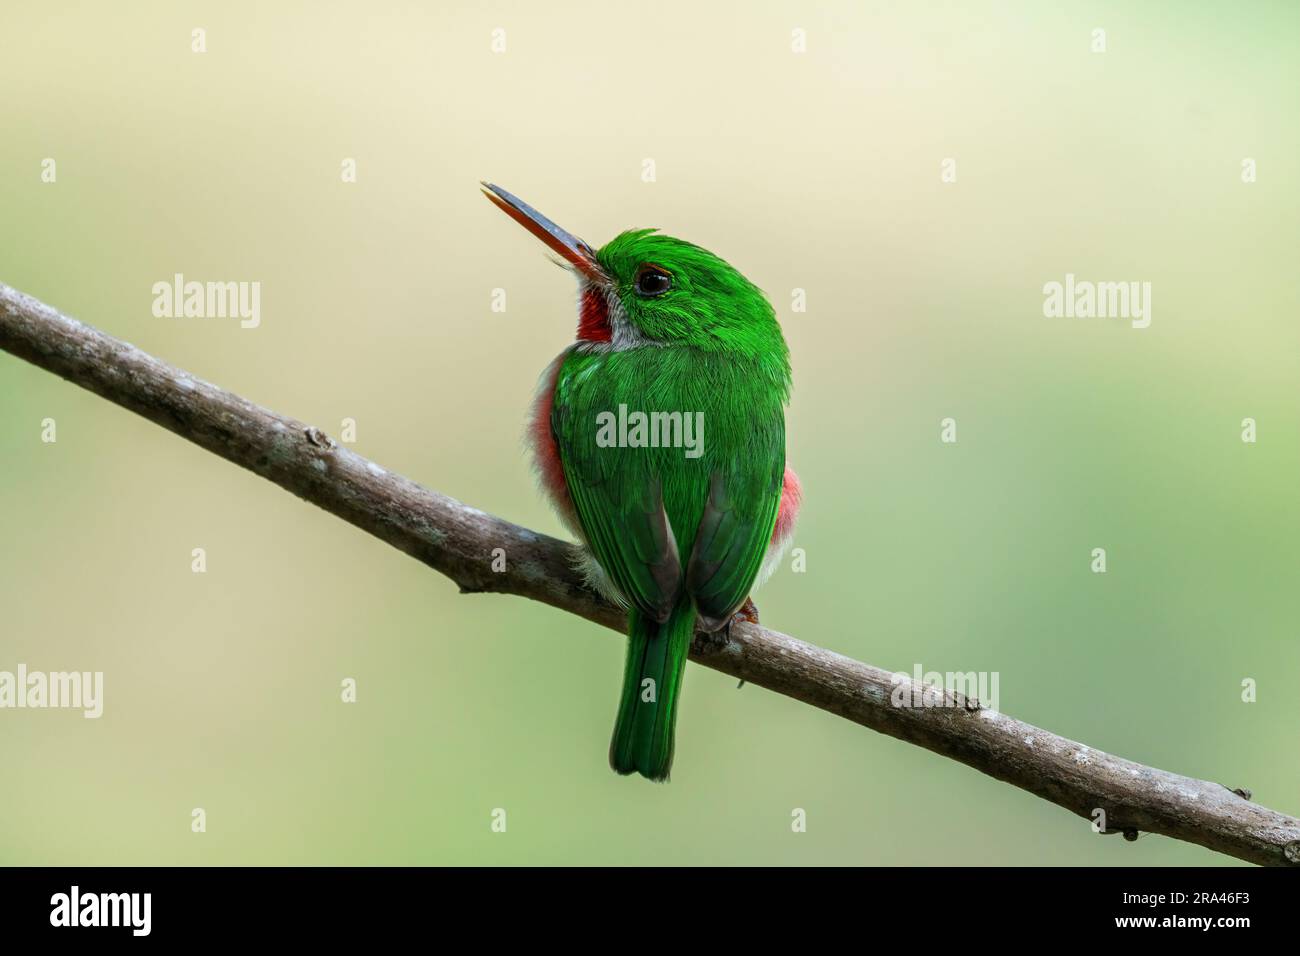 Close-up of a green and red tody bird on a branch - looking to the left. The background is isolated and blurred. Stock Photo